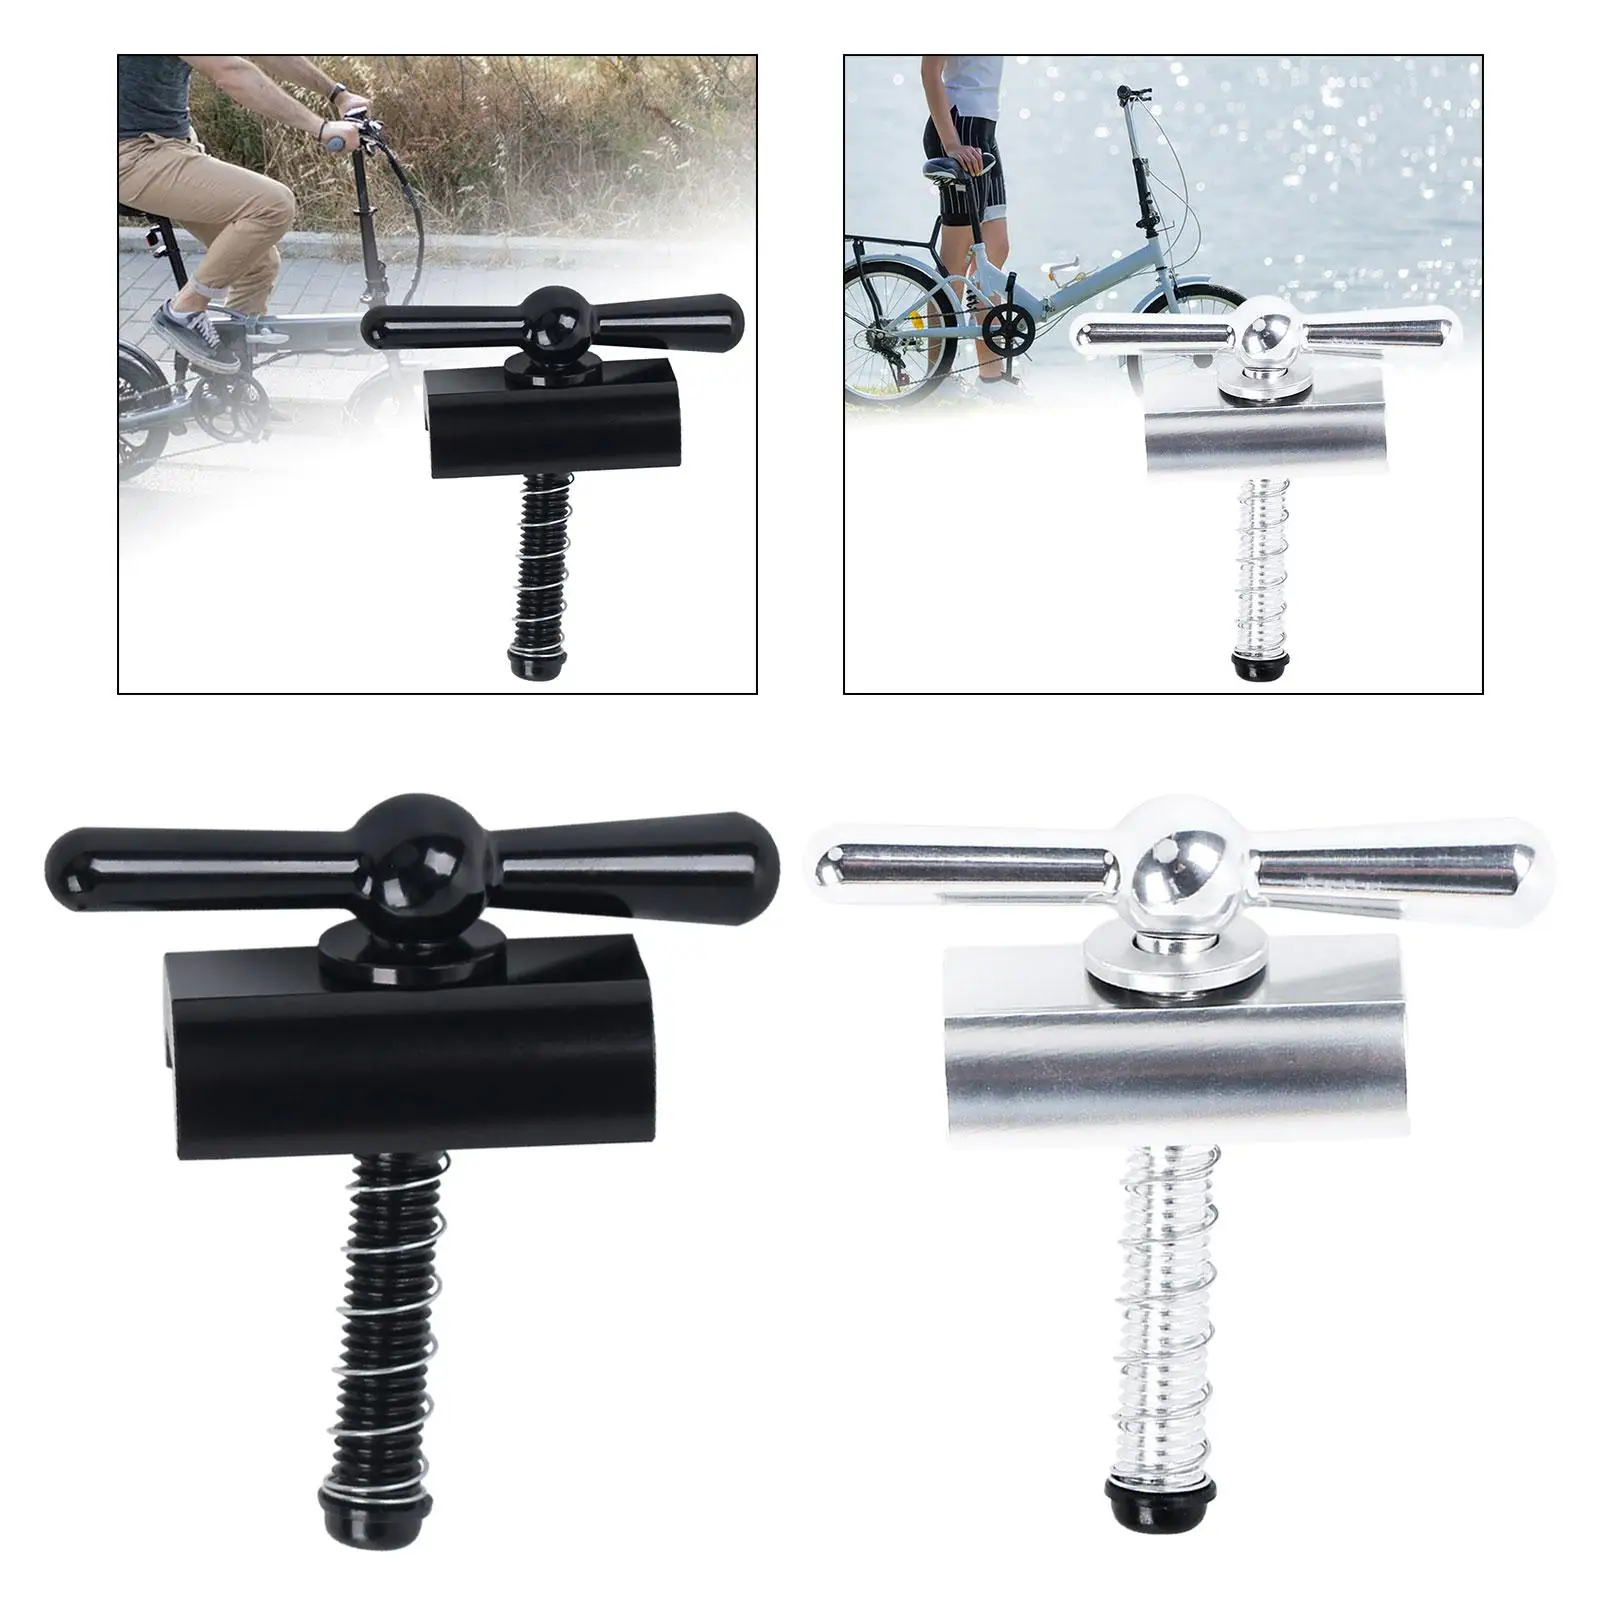 Folding Bike Hinge Clamp C Buckle Lightweight CNC Aluminium Alloy Turn Handle Bicycle Accessories Hinge Clamp Plate for Frame